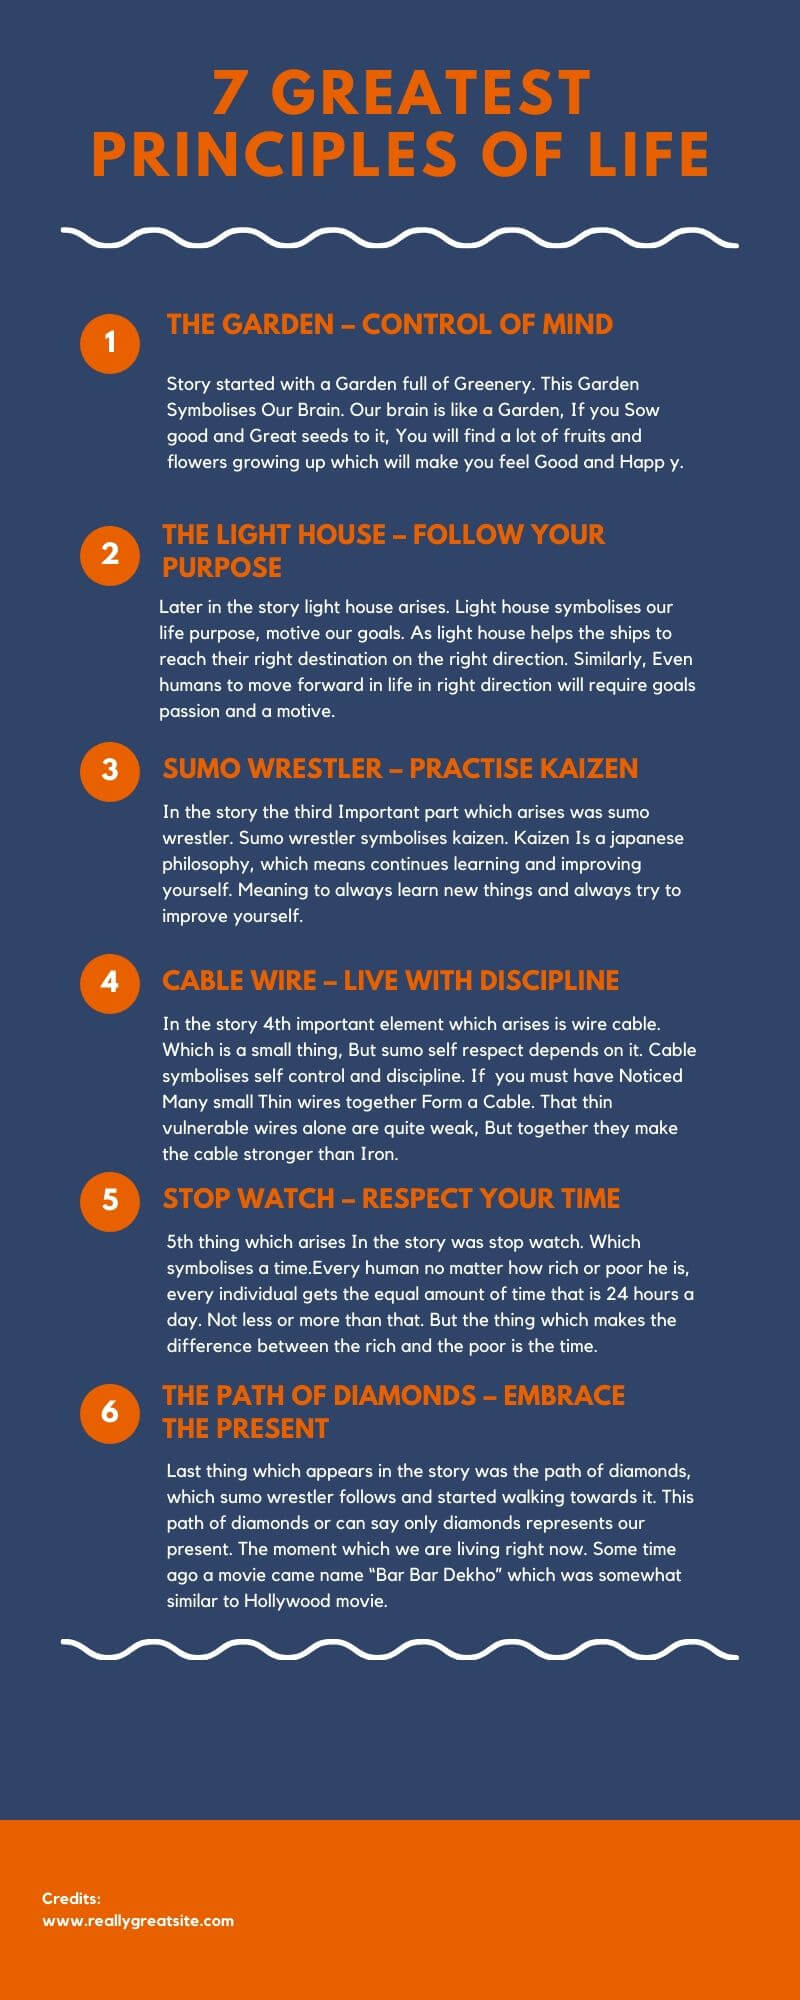 7 Greatest Principles of Life